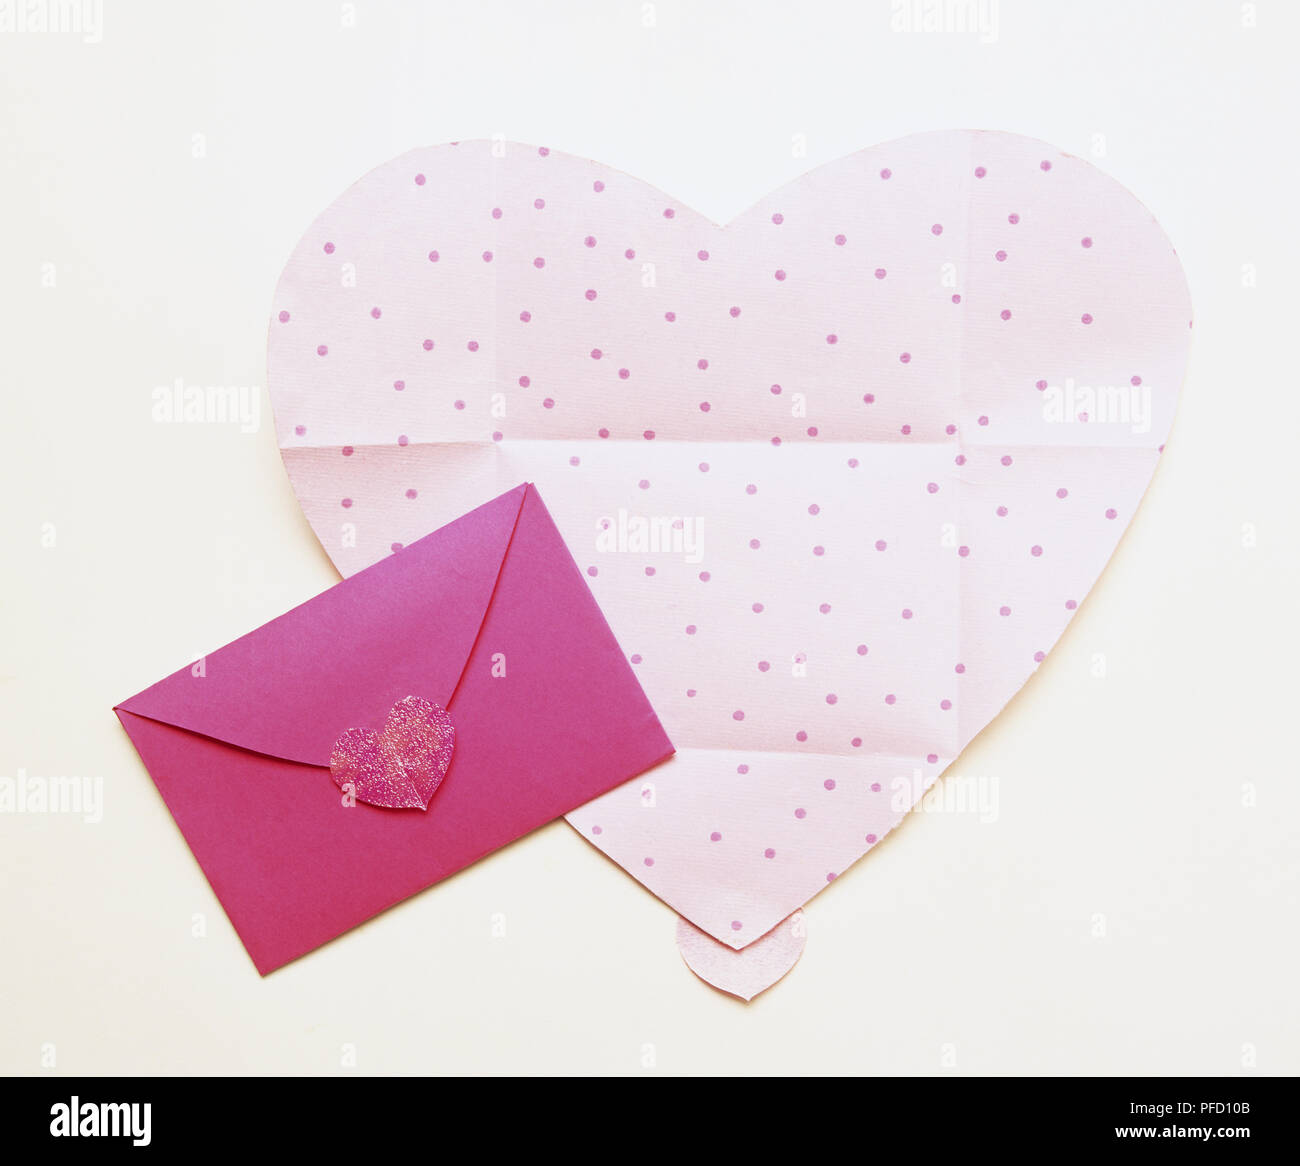 Cut out of pale pink heart with dots, and cerise envelope fastened with red cut out heart Stock Photo